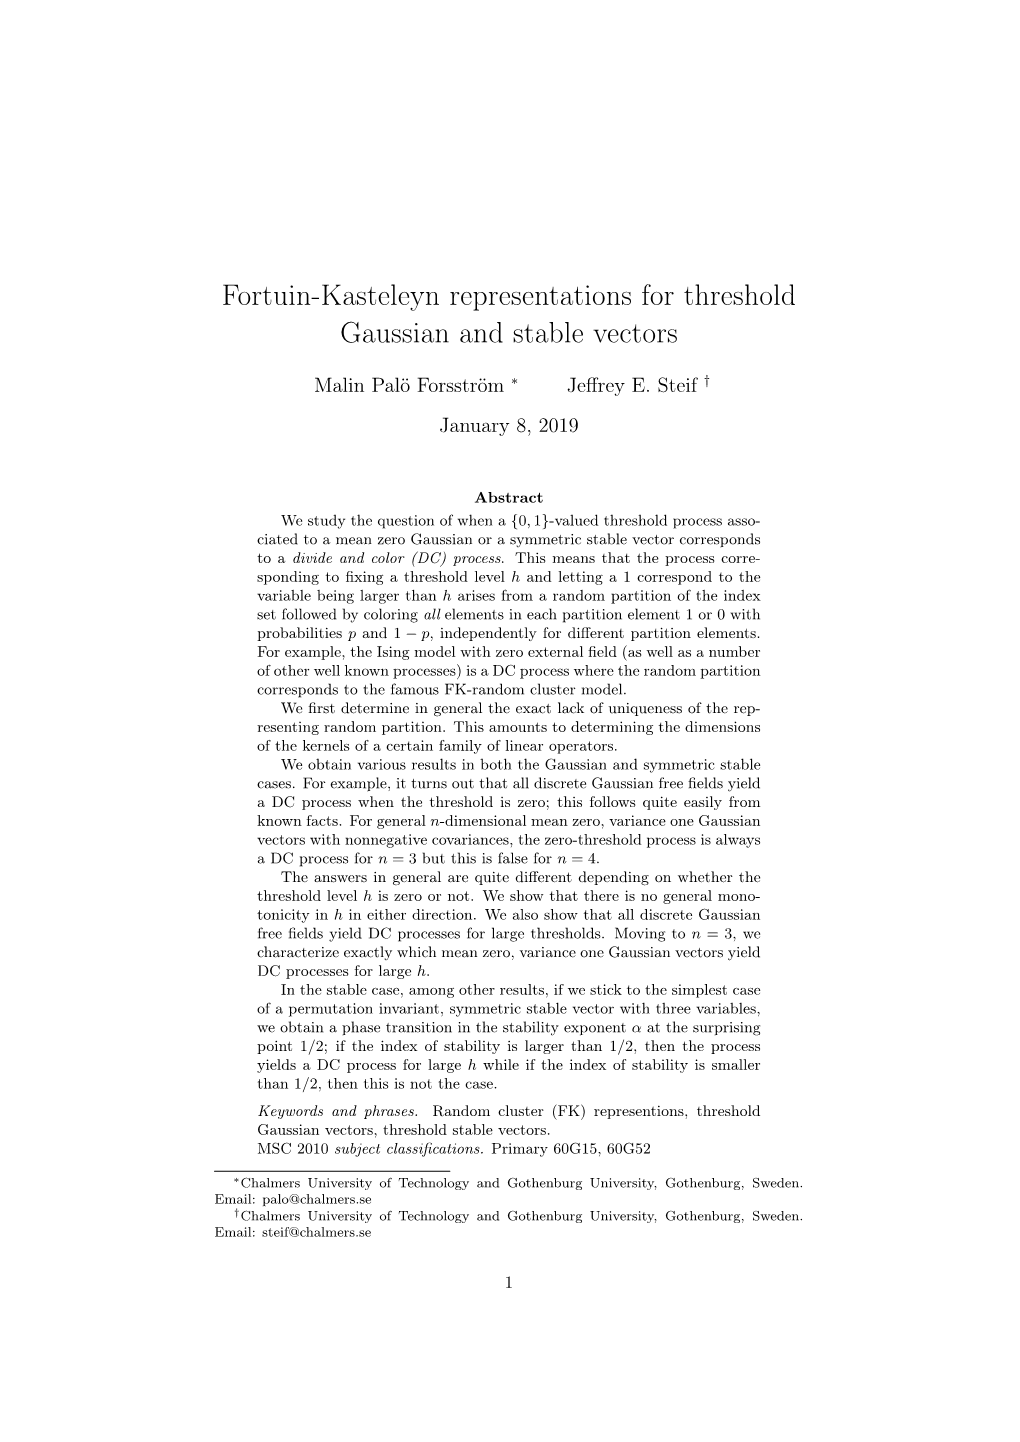 Fortuin-Kasteleyn Representations for Threshold Gaussian and Stable Vectors